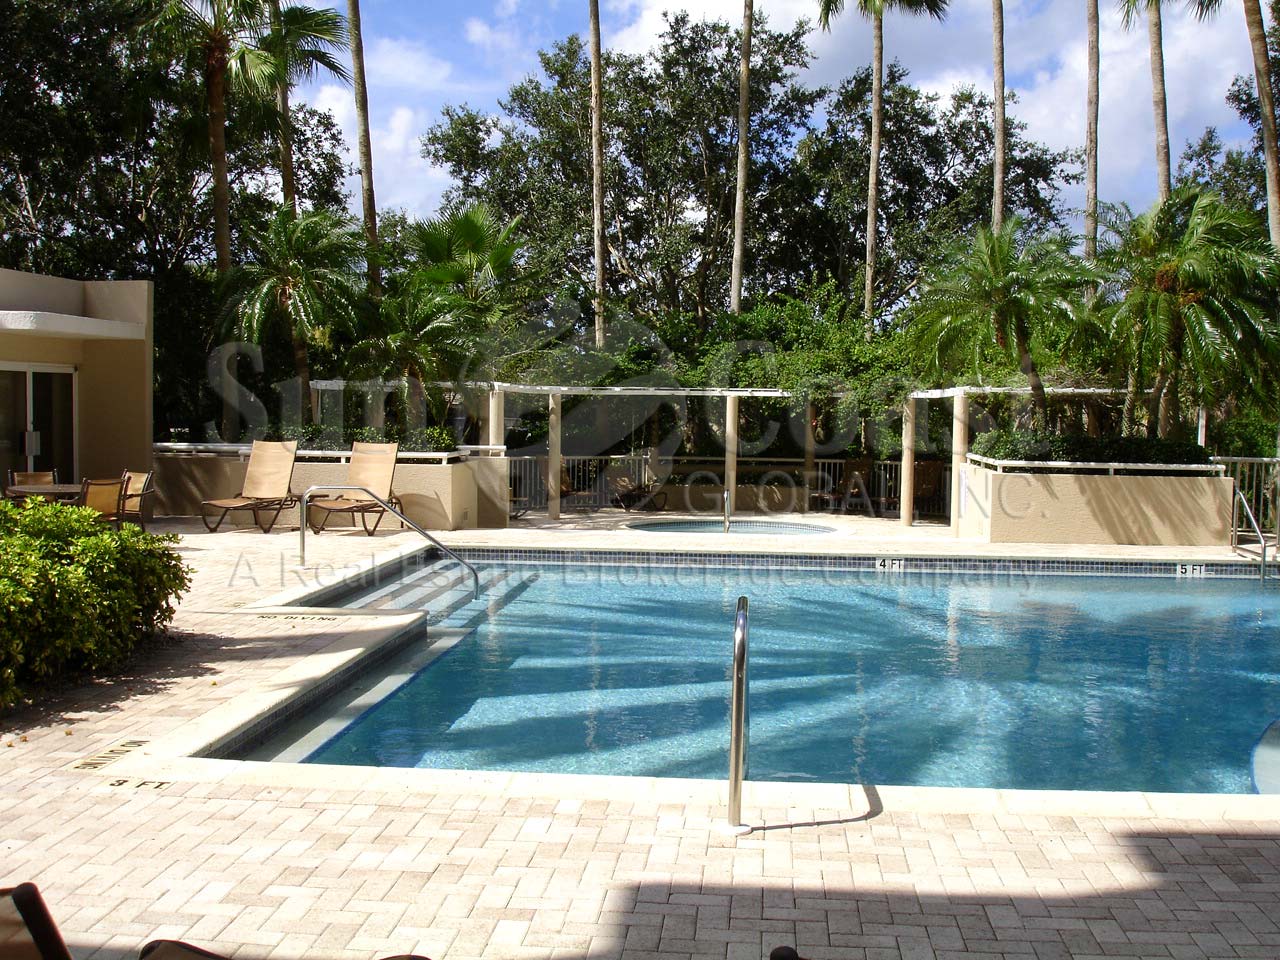 St Pierre Pool and Hot Tub